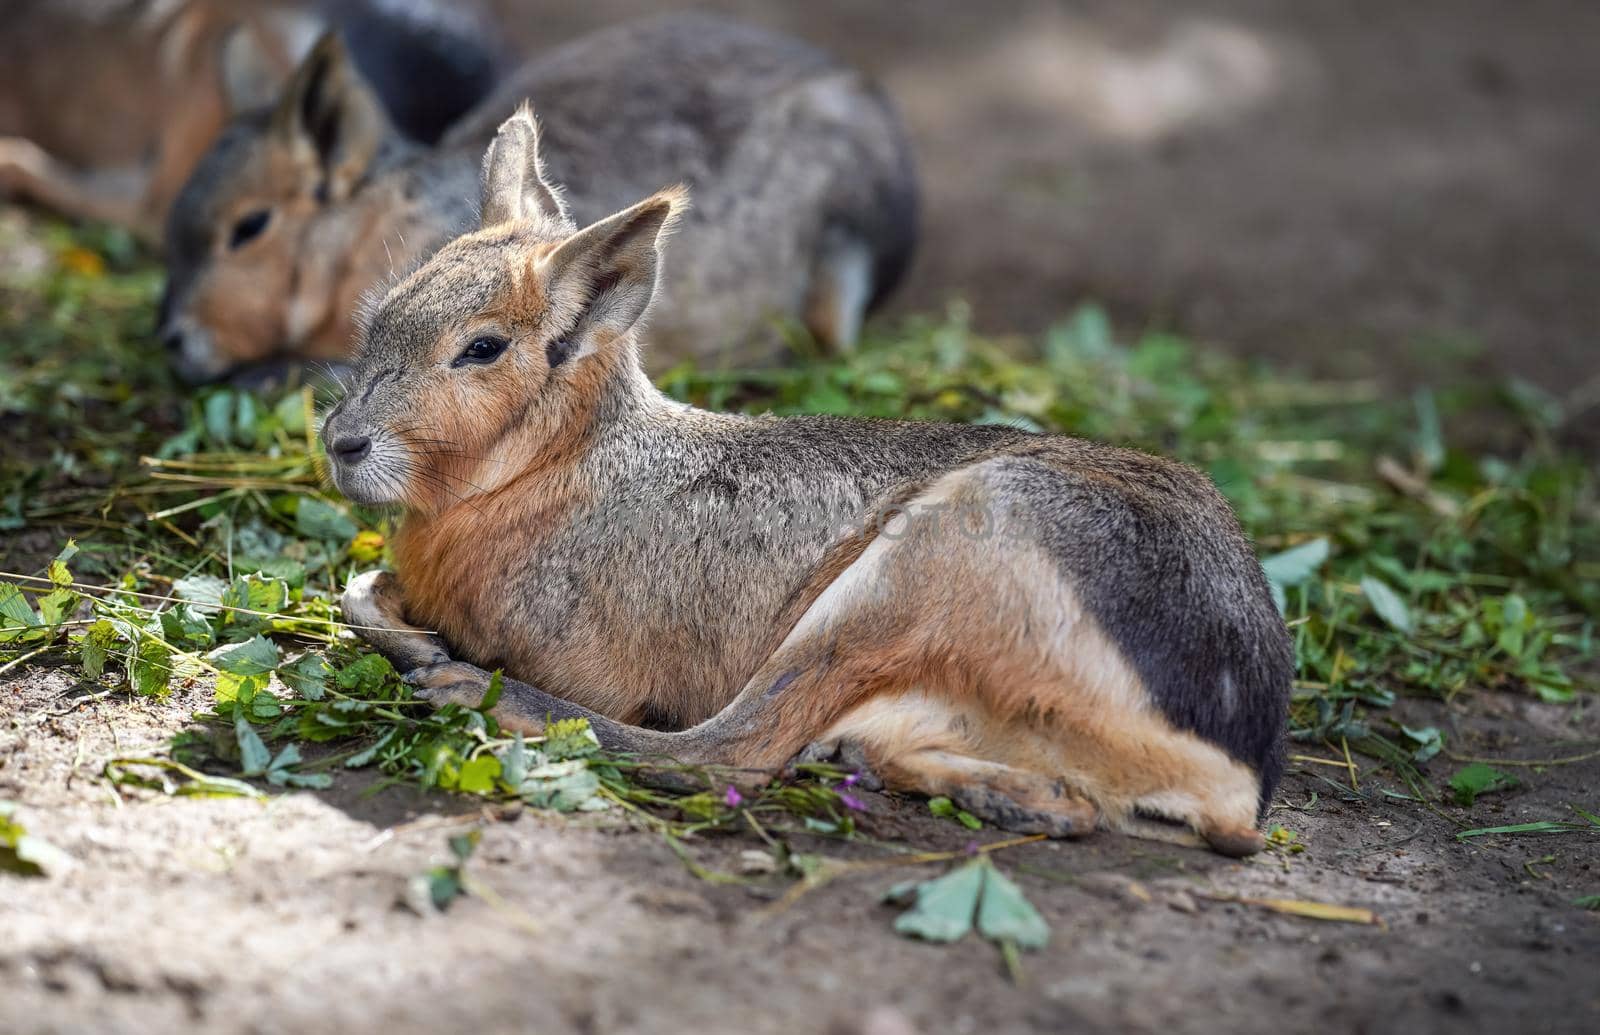 Patagonian Mara Dolichotis patagonum resting on ground in zoo, another animal blurred background, some green leaves food near.